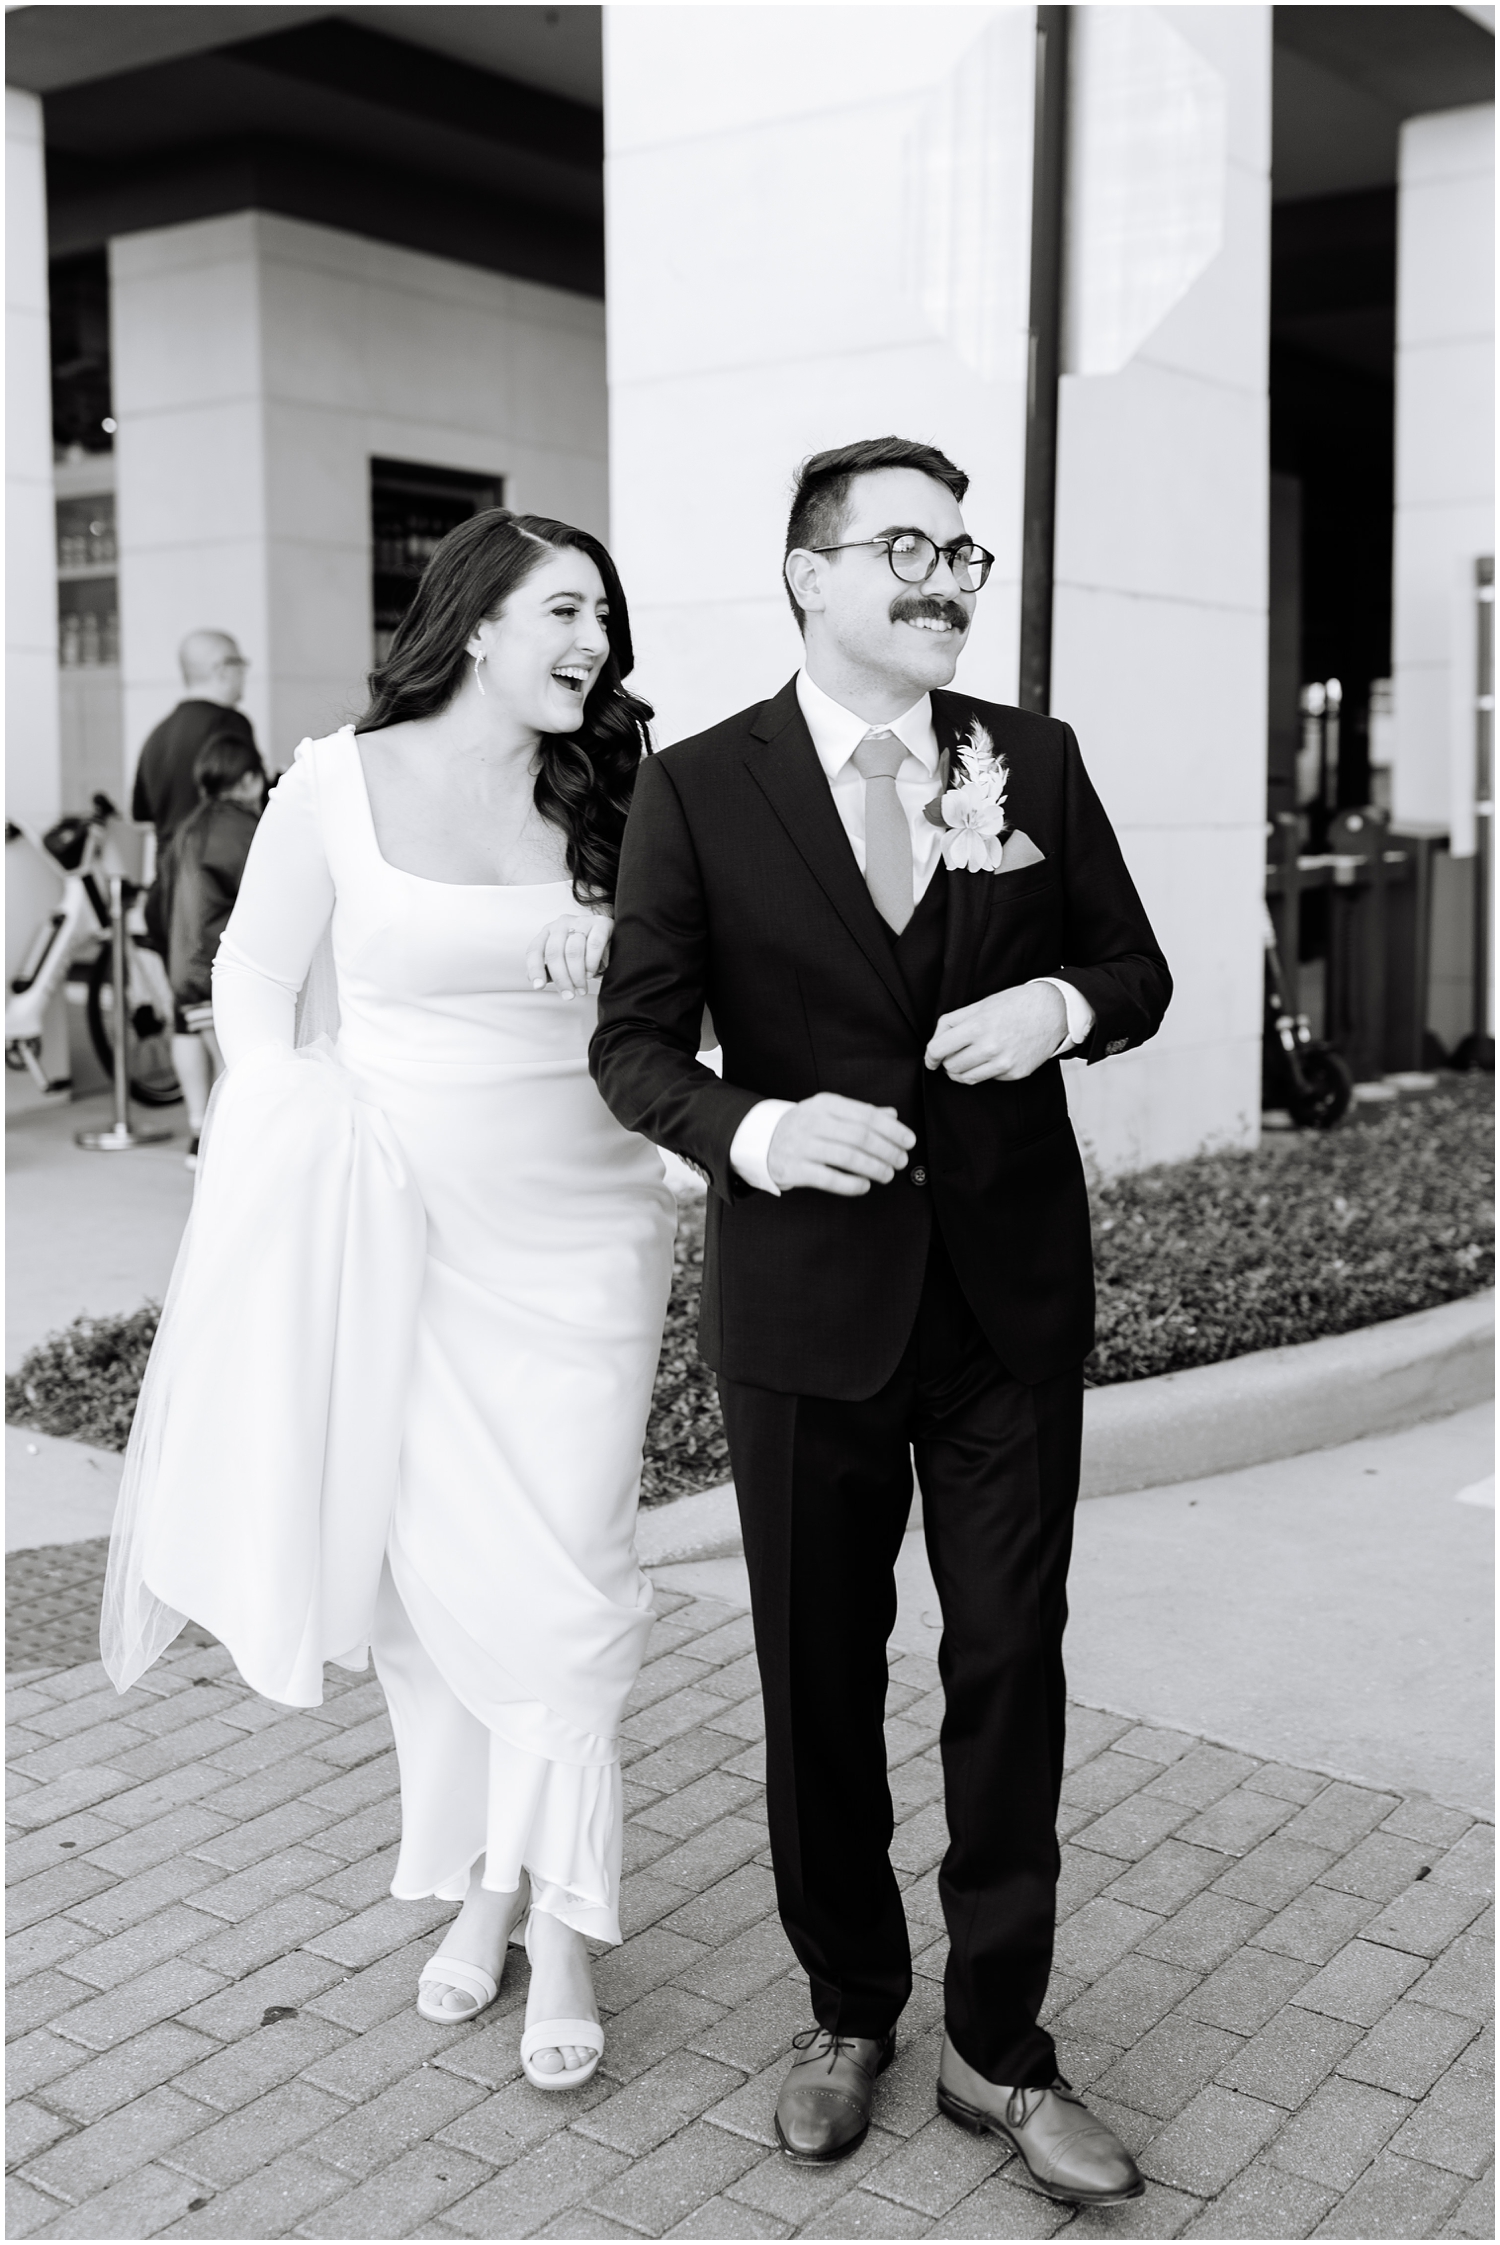 black and white candid image of a couple walking together on their wedding day in South Tampa, FL